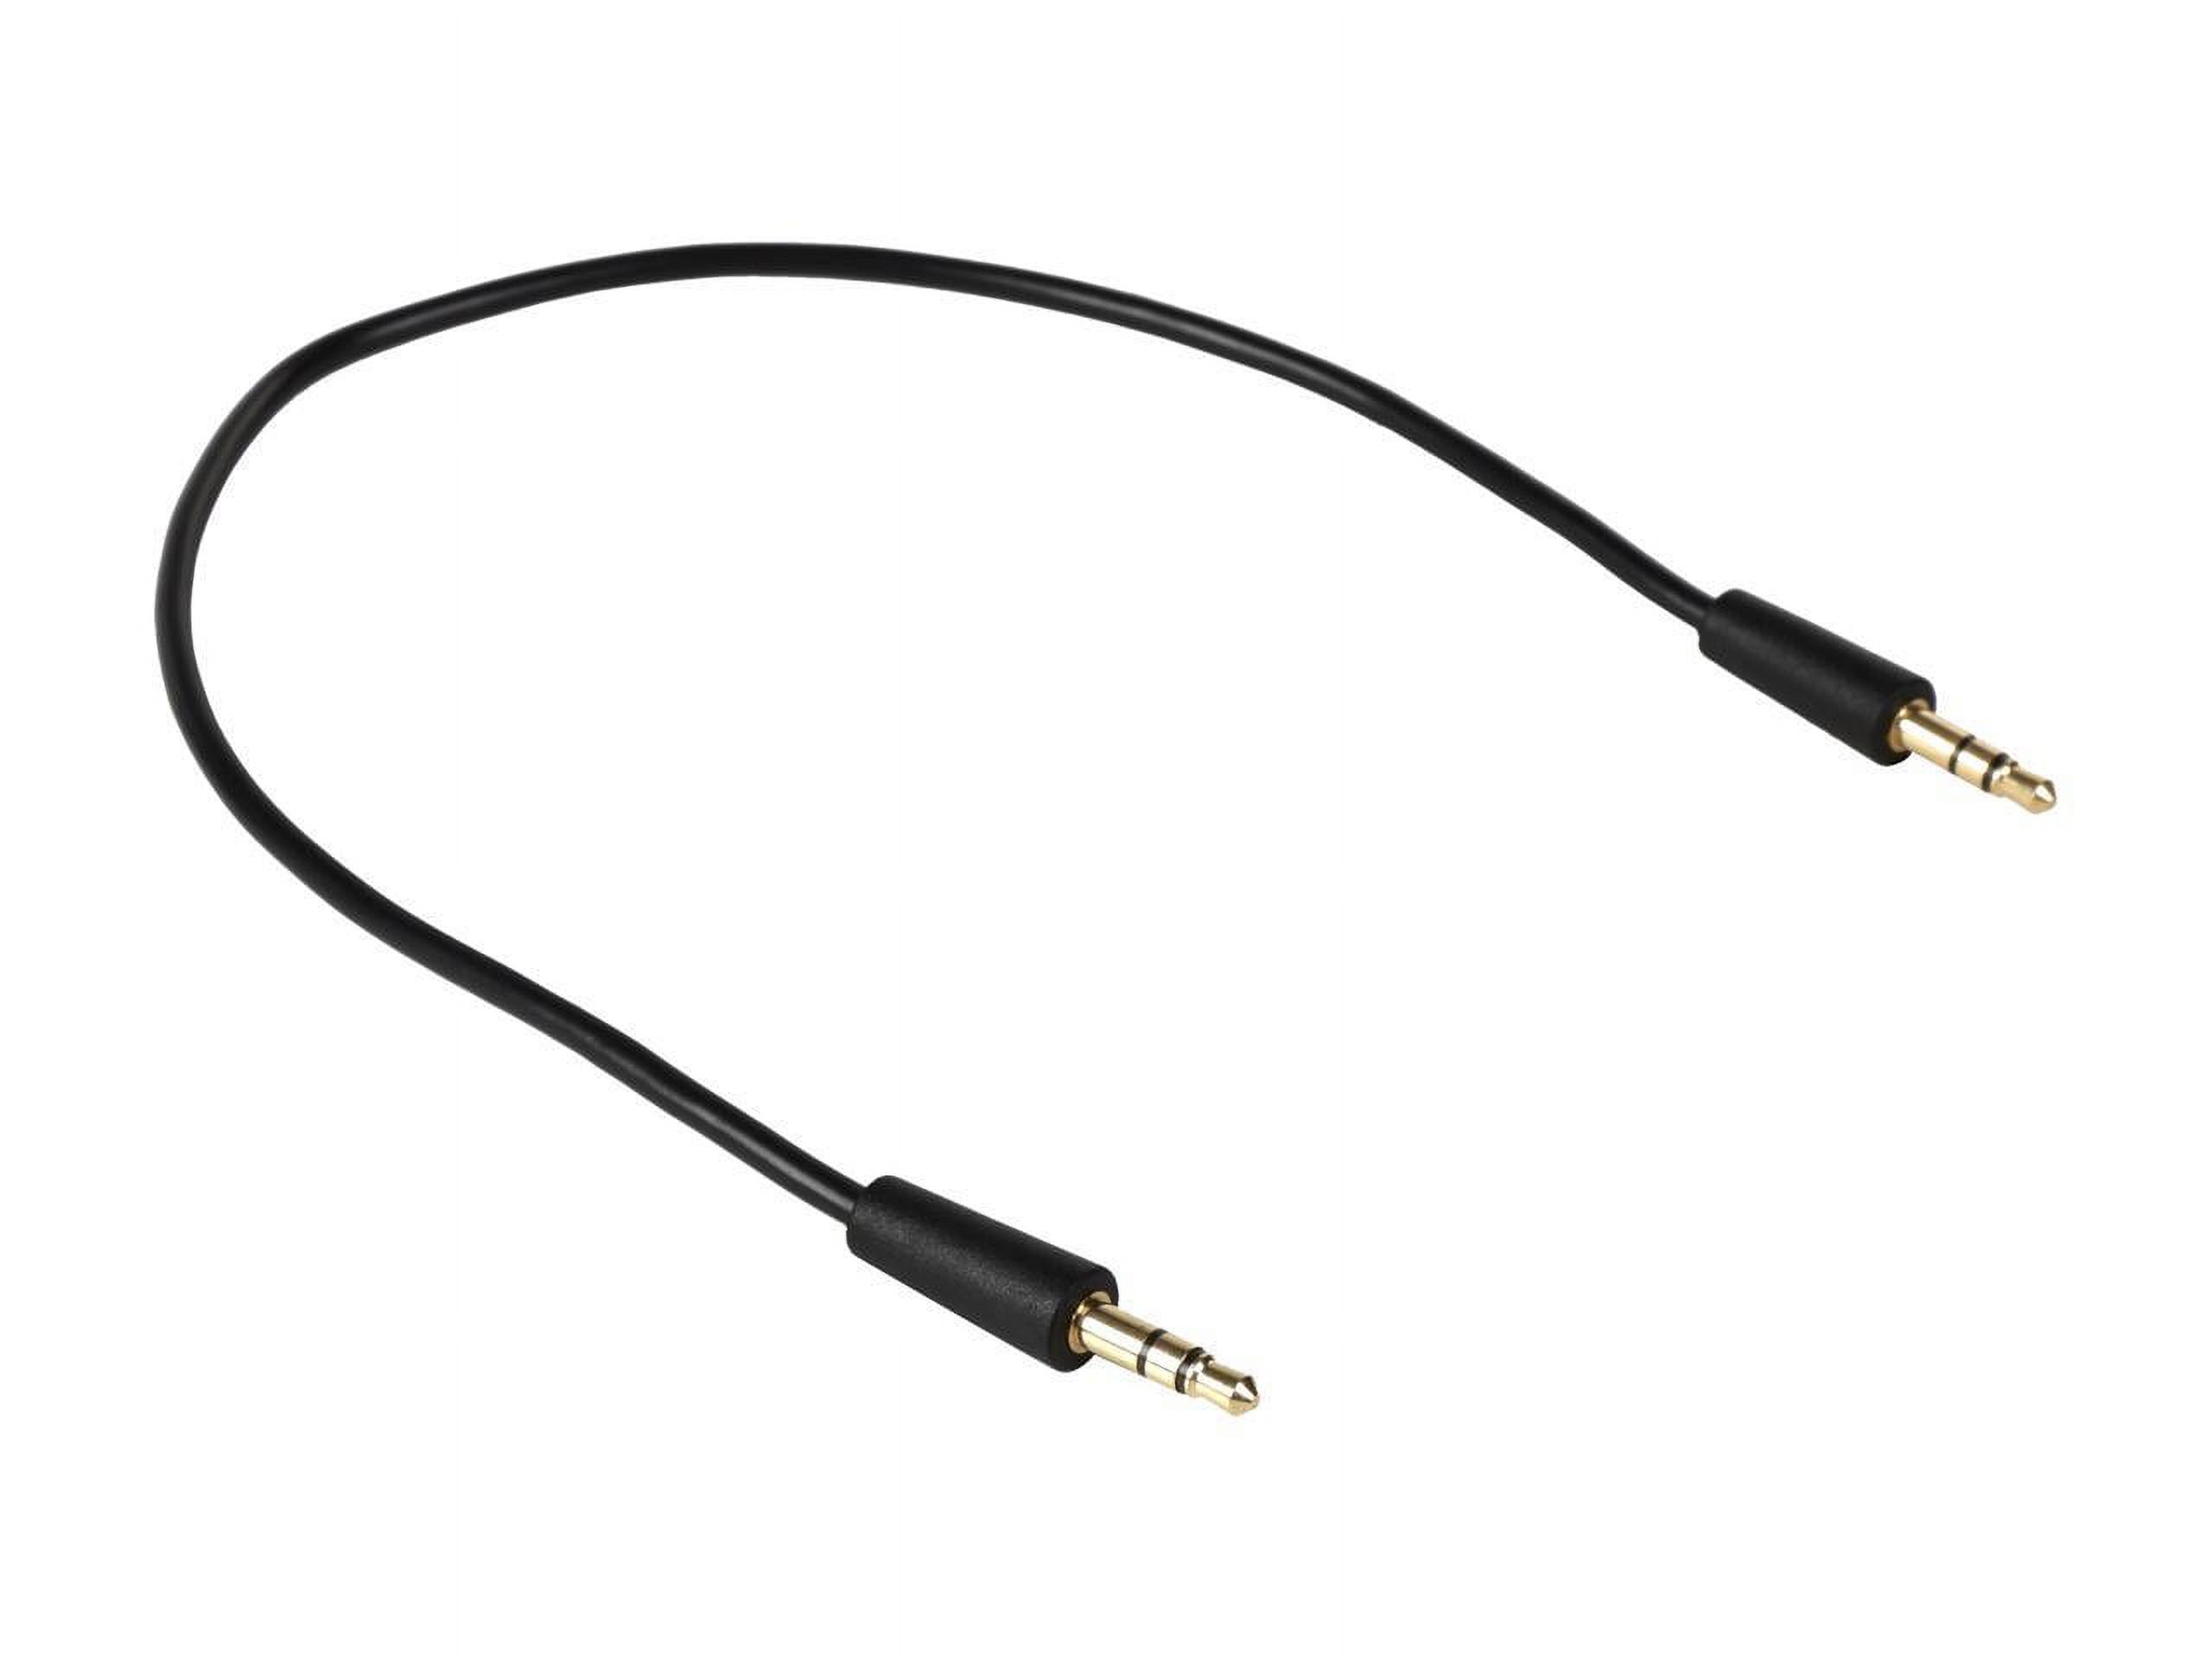 Tripp Lite P312-001 3.5mm Mini Stereo Audio Cable for Microphones, Speakers and Headphones Male to Male - image 2 of 4